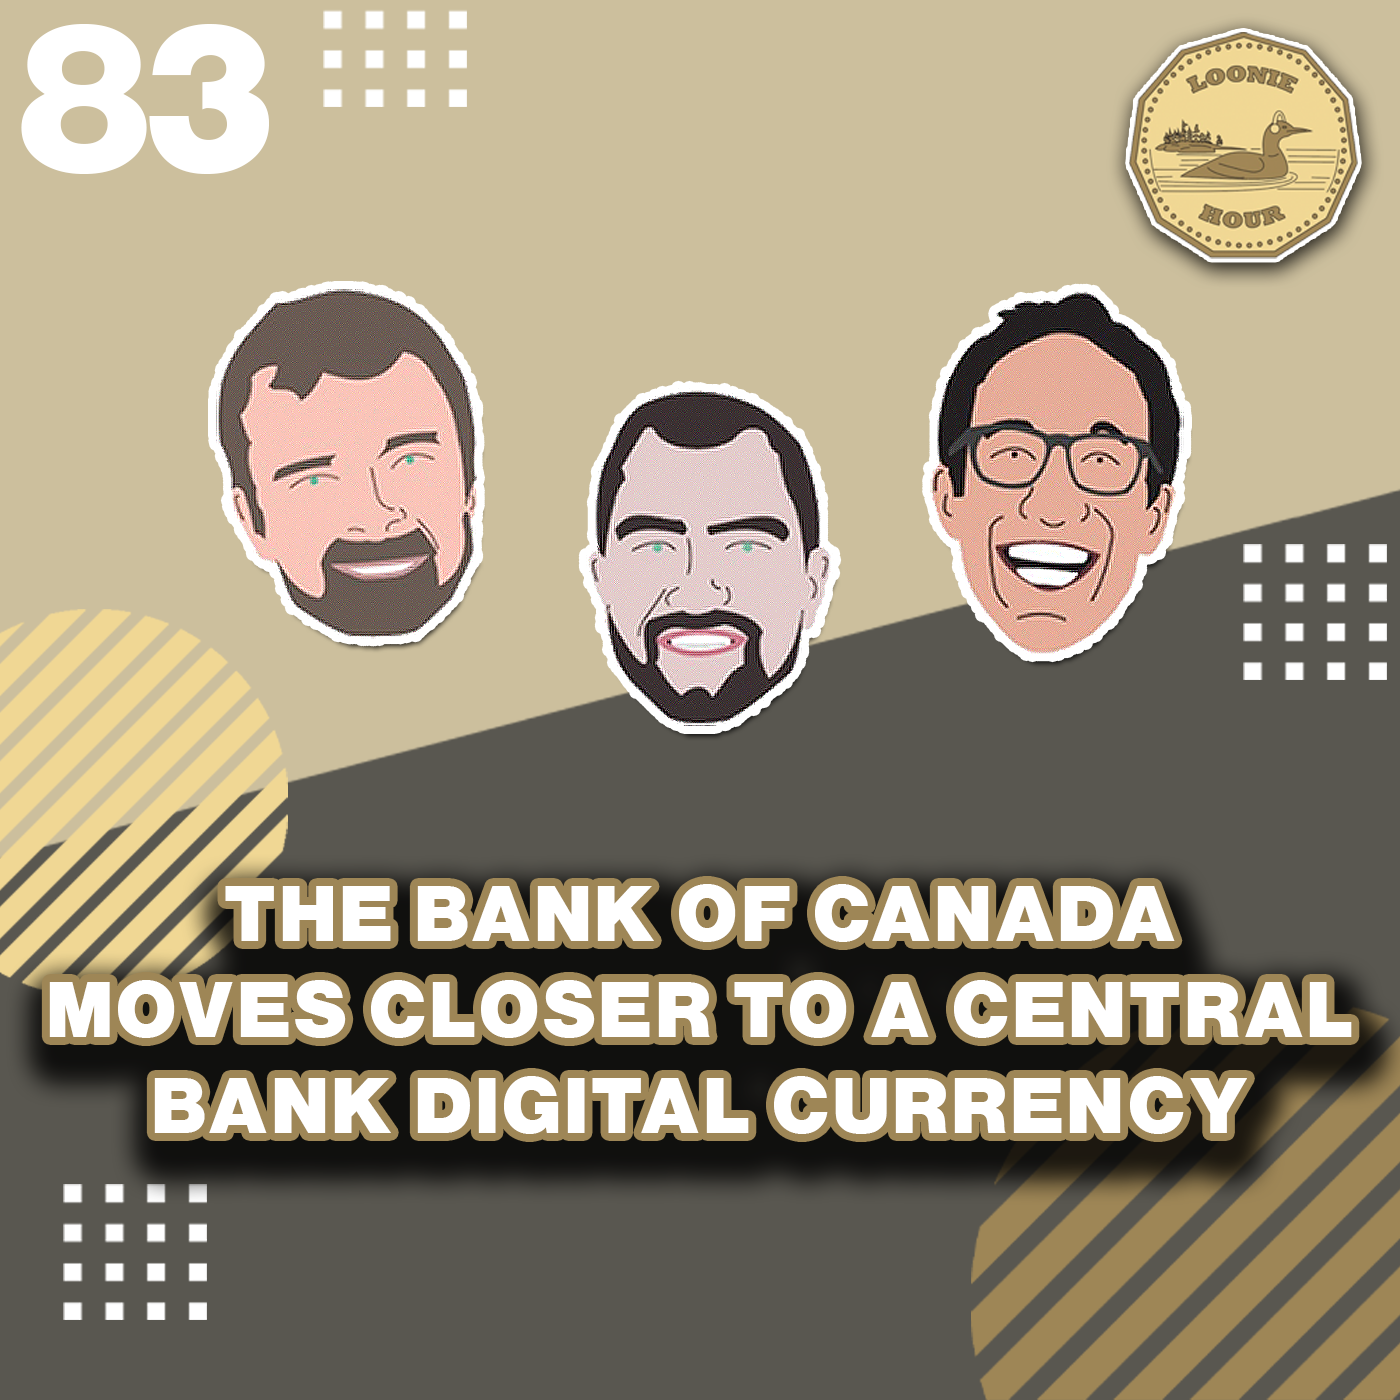 The Bank of Canada Moves Closer to a Central Bank Digital Currency